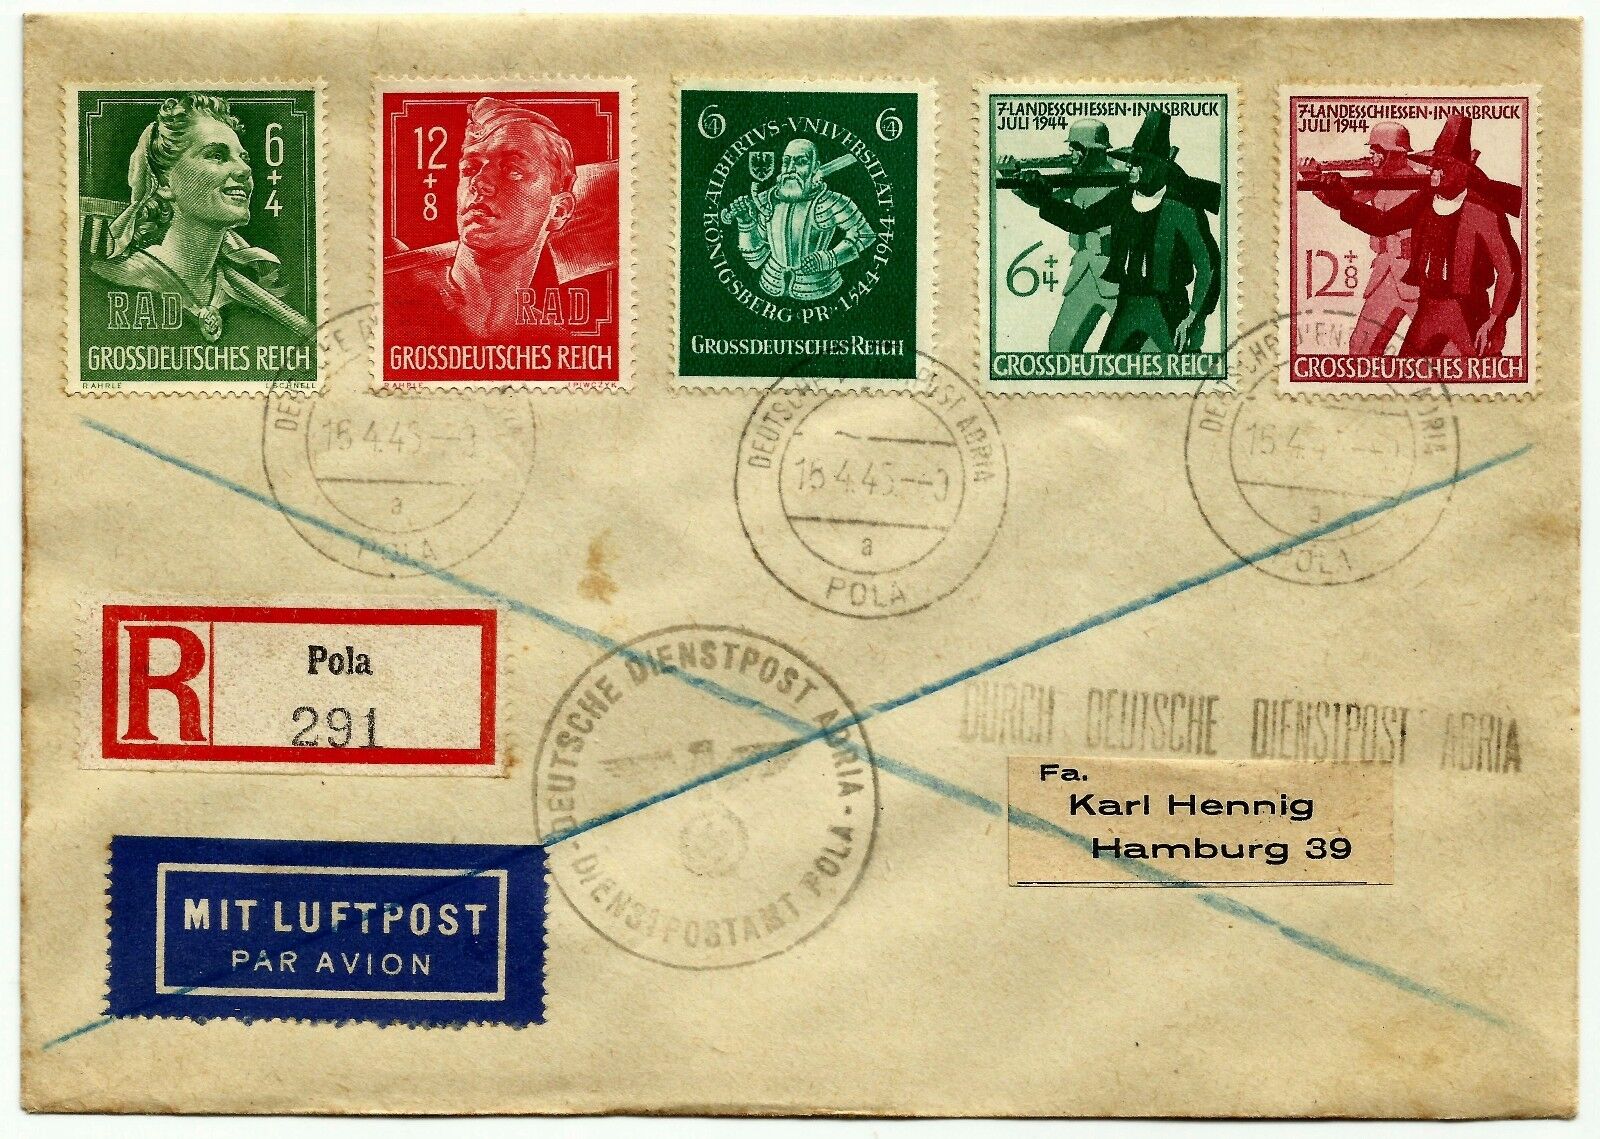 Germany 1945, cover from Pola to Hamburg, last days of WWII